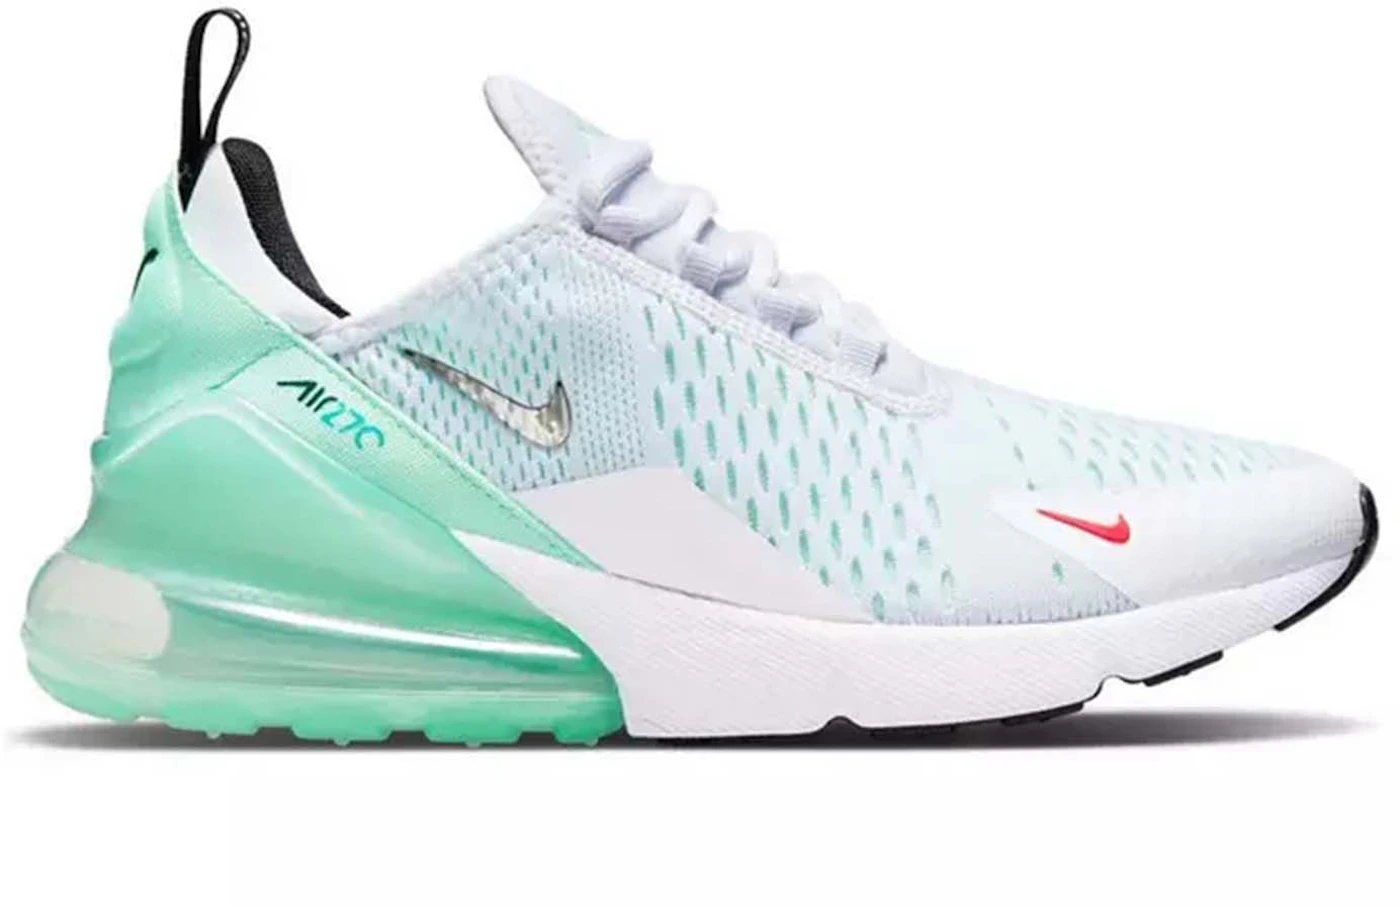 Nike Air Max 270 Mint Foam Washed Teal (Women's) - DQ7652-100 - US